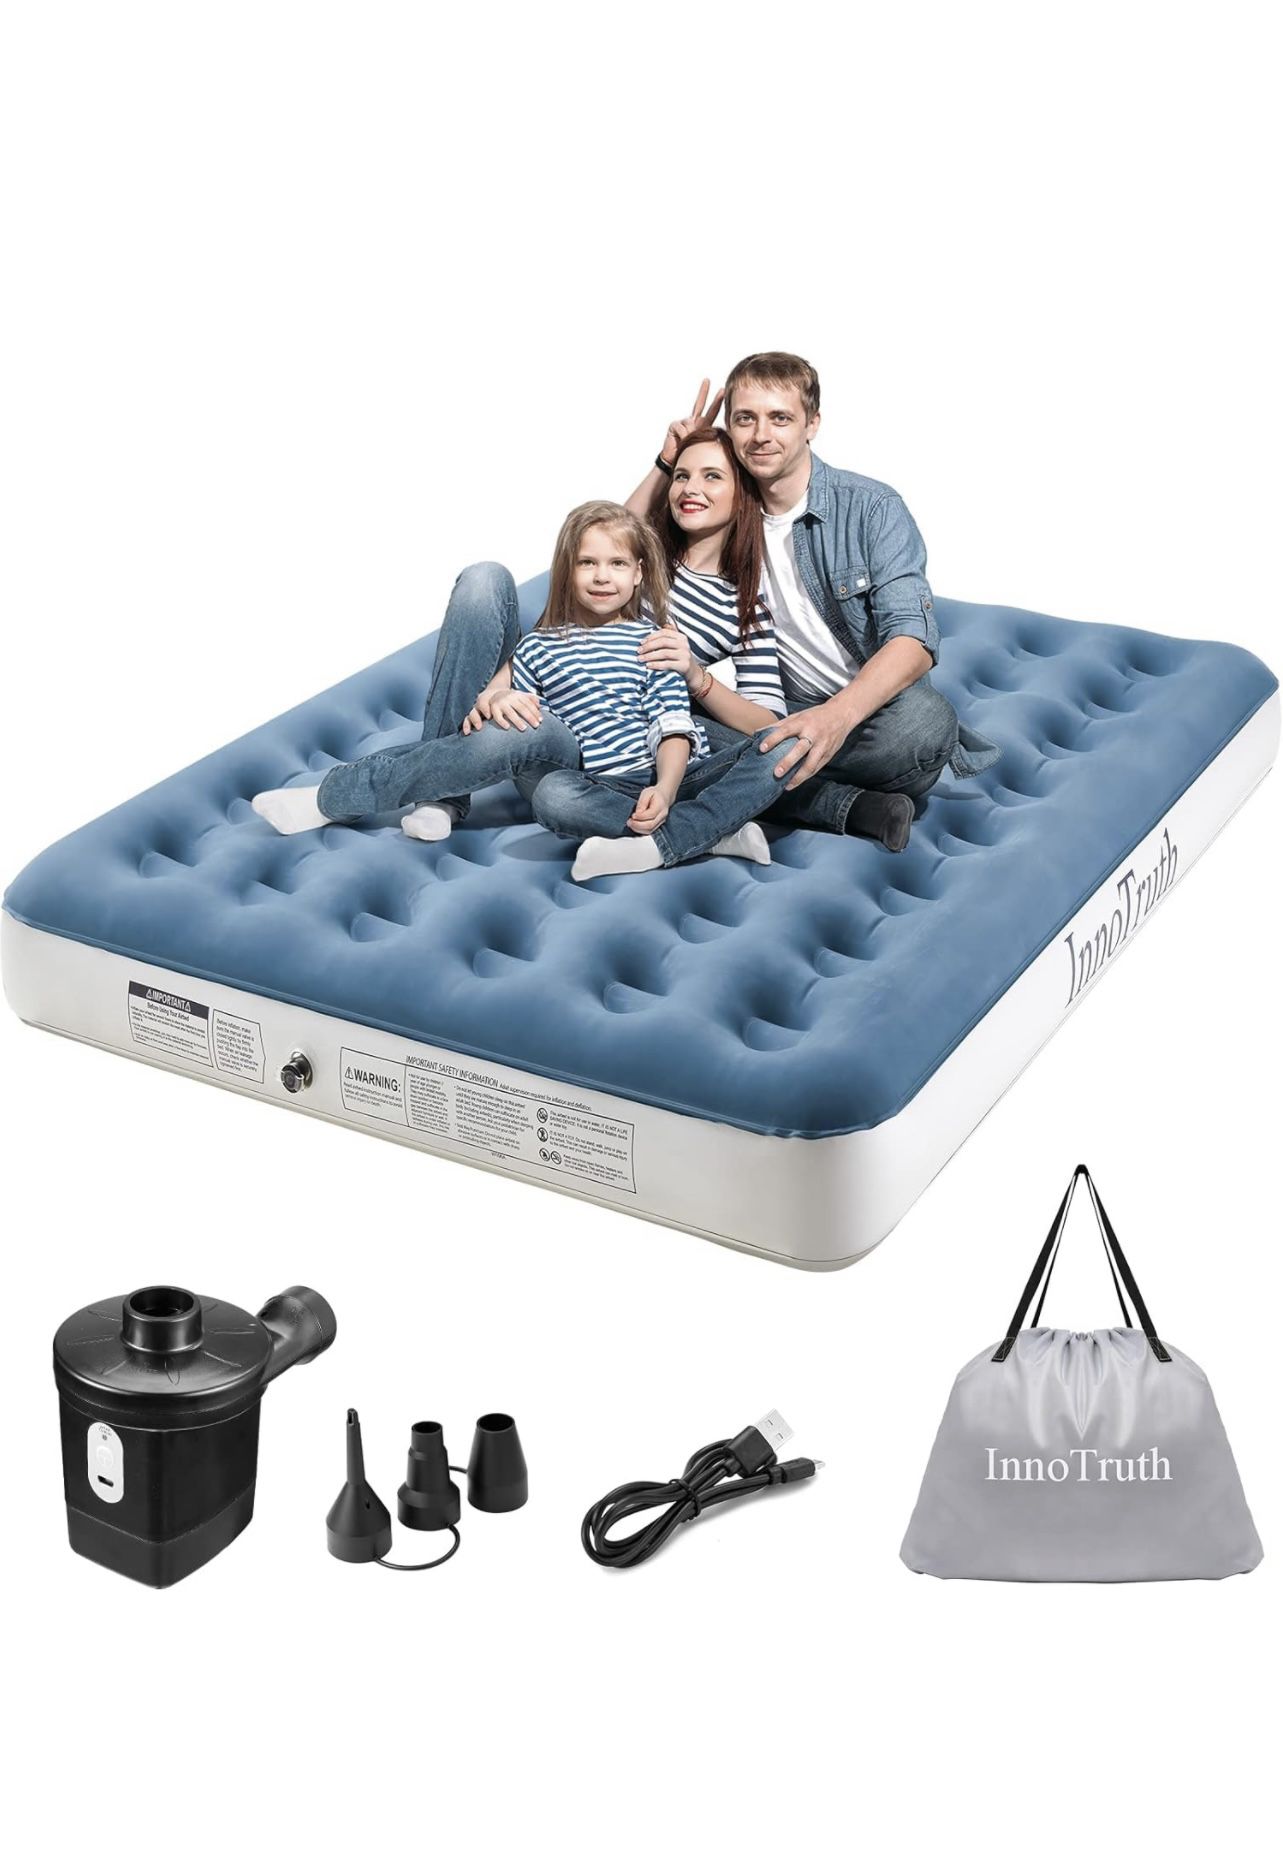  InnoTruth Queen Camping Air Mattress Bed, Rechargeable Handheld Electric Pump